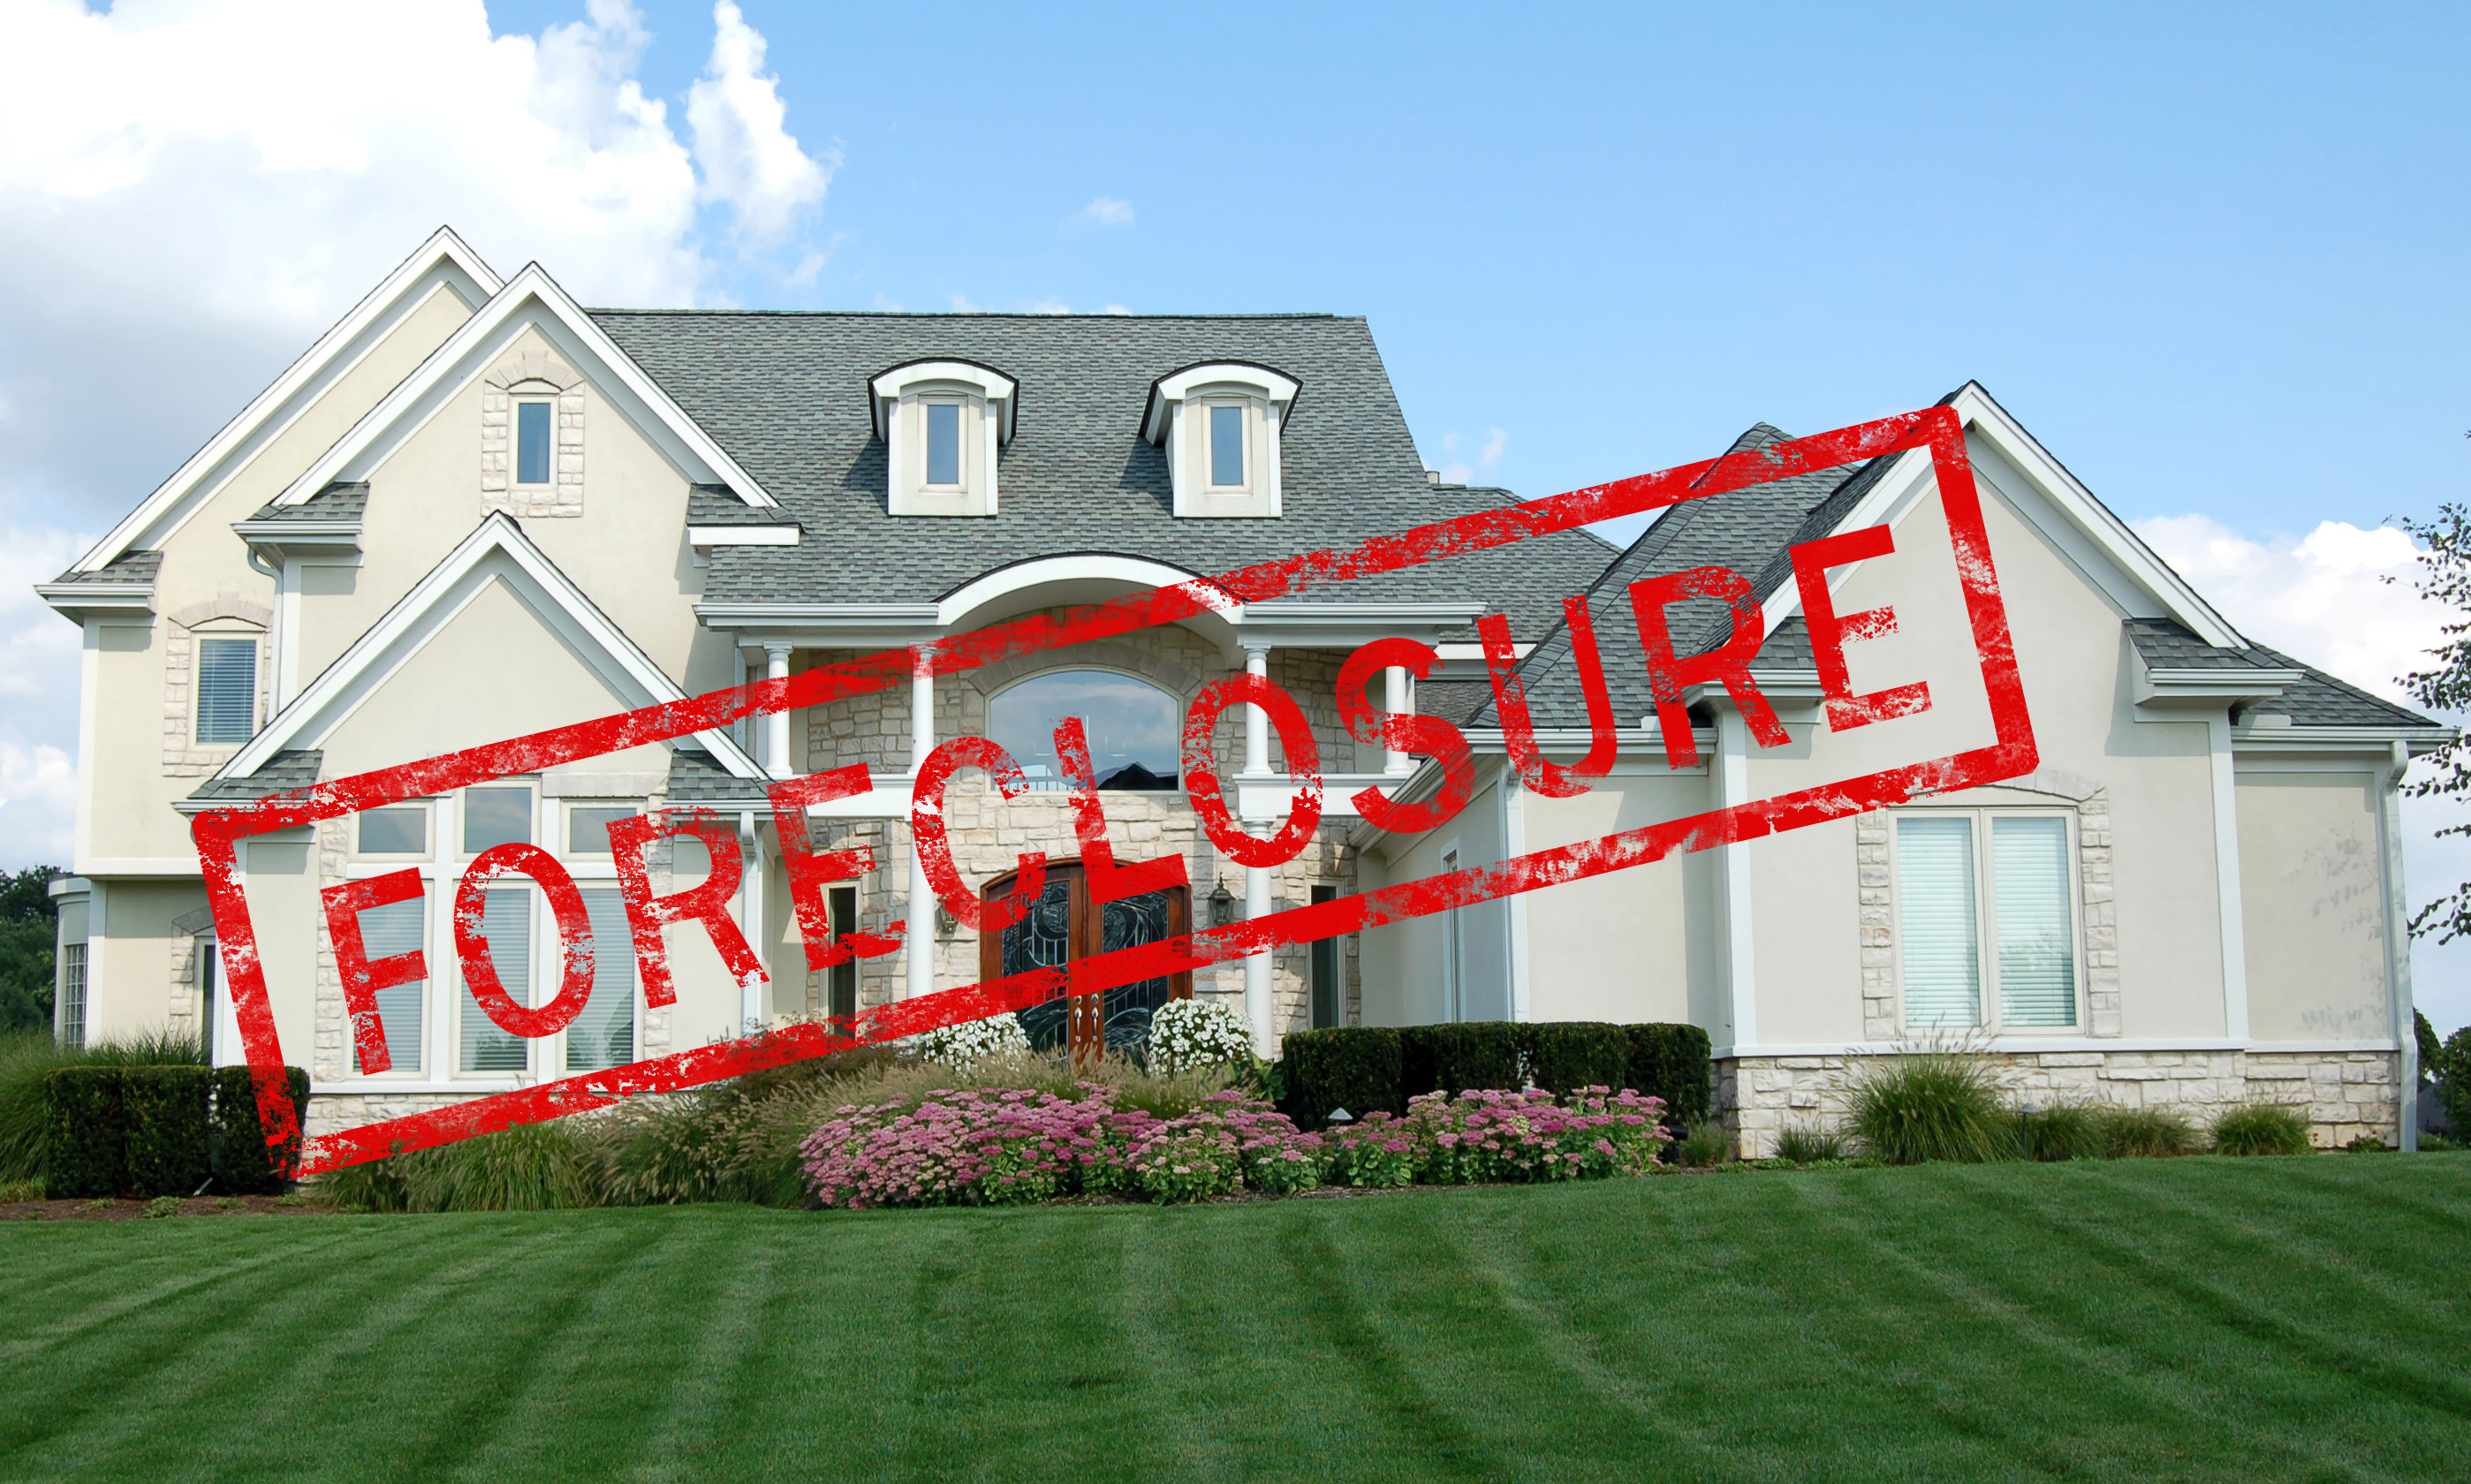 Call Tri-Cities Appraisal Services, LLC when you need valuations pertaining to Franklin foreclosures